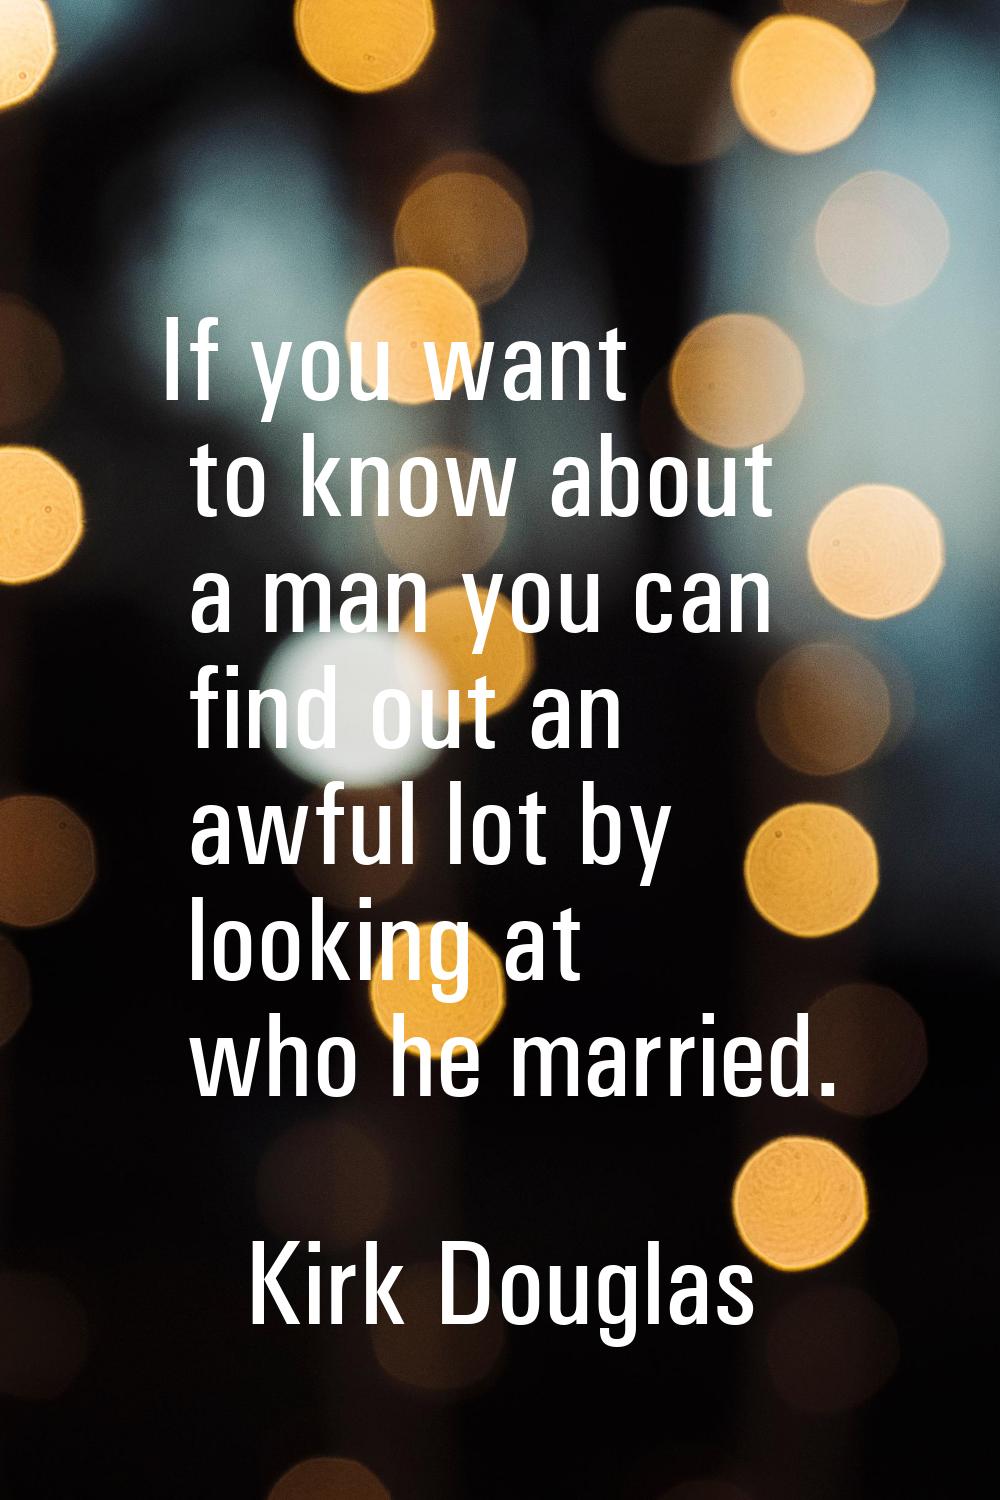 If you want to know about a man you can find out an awful lot by looking at who he married.